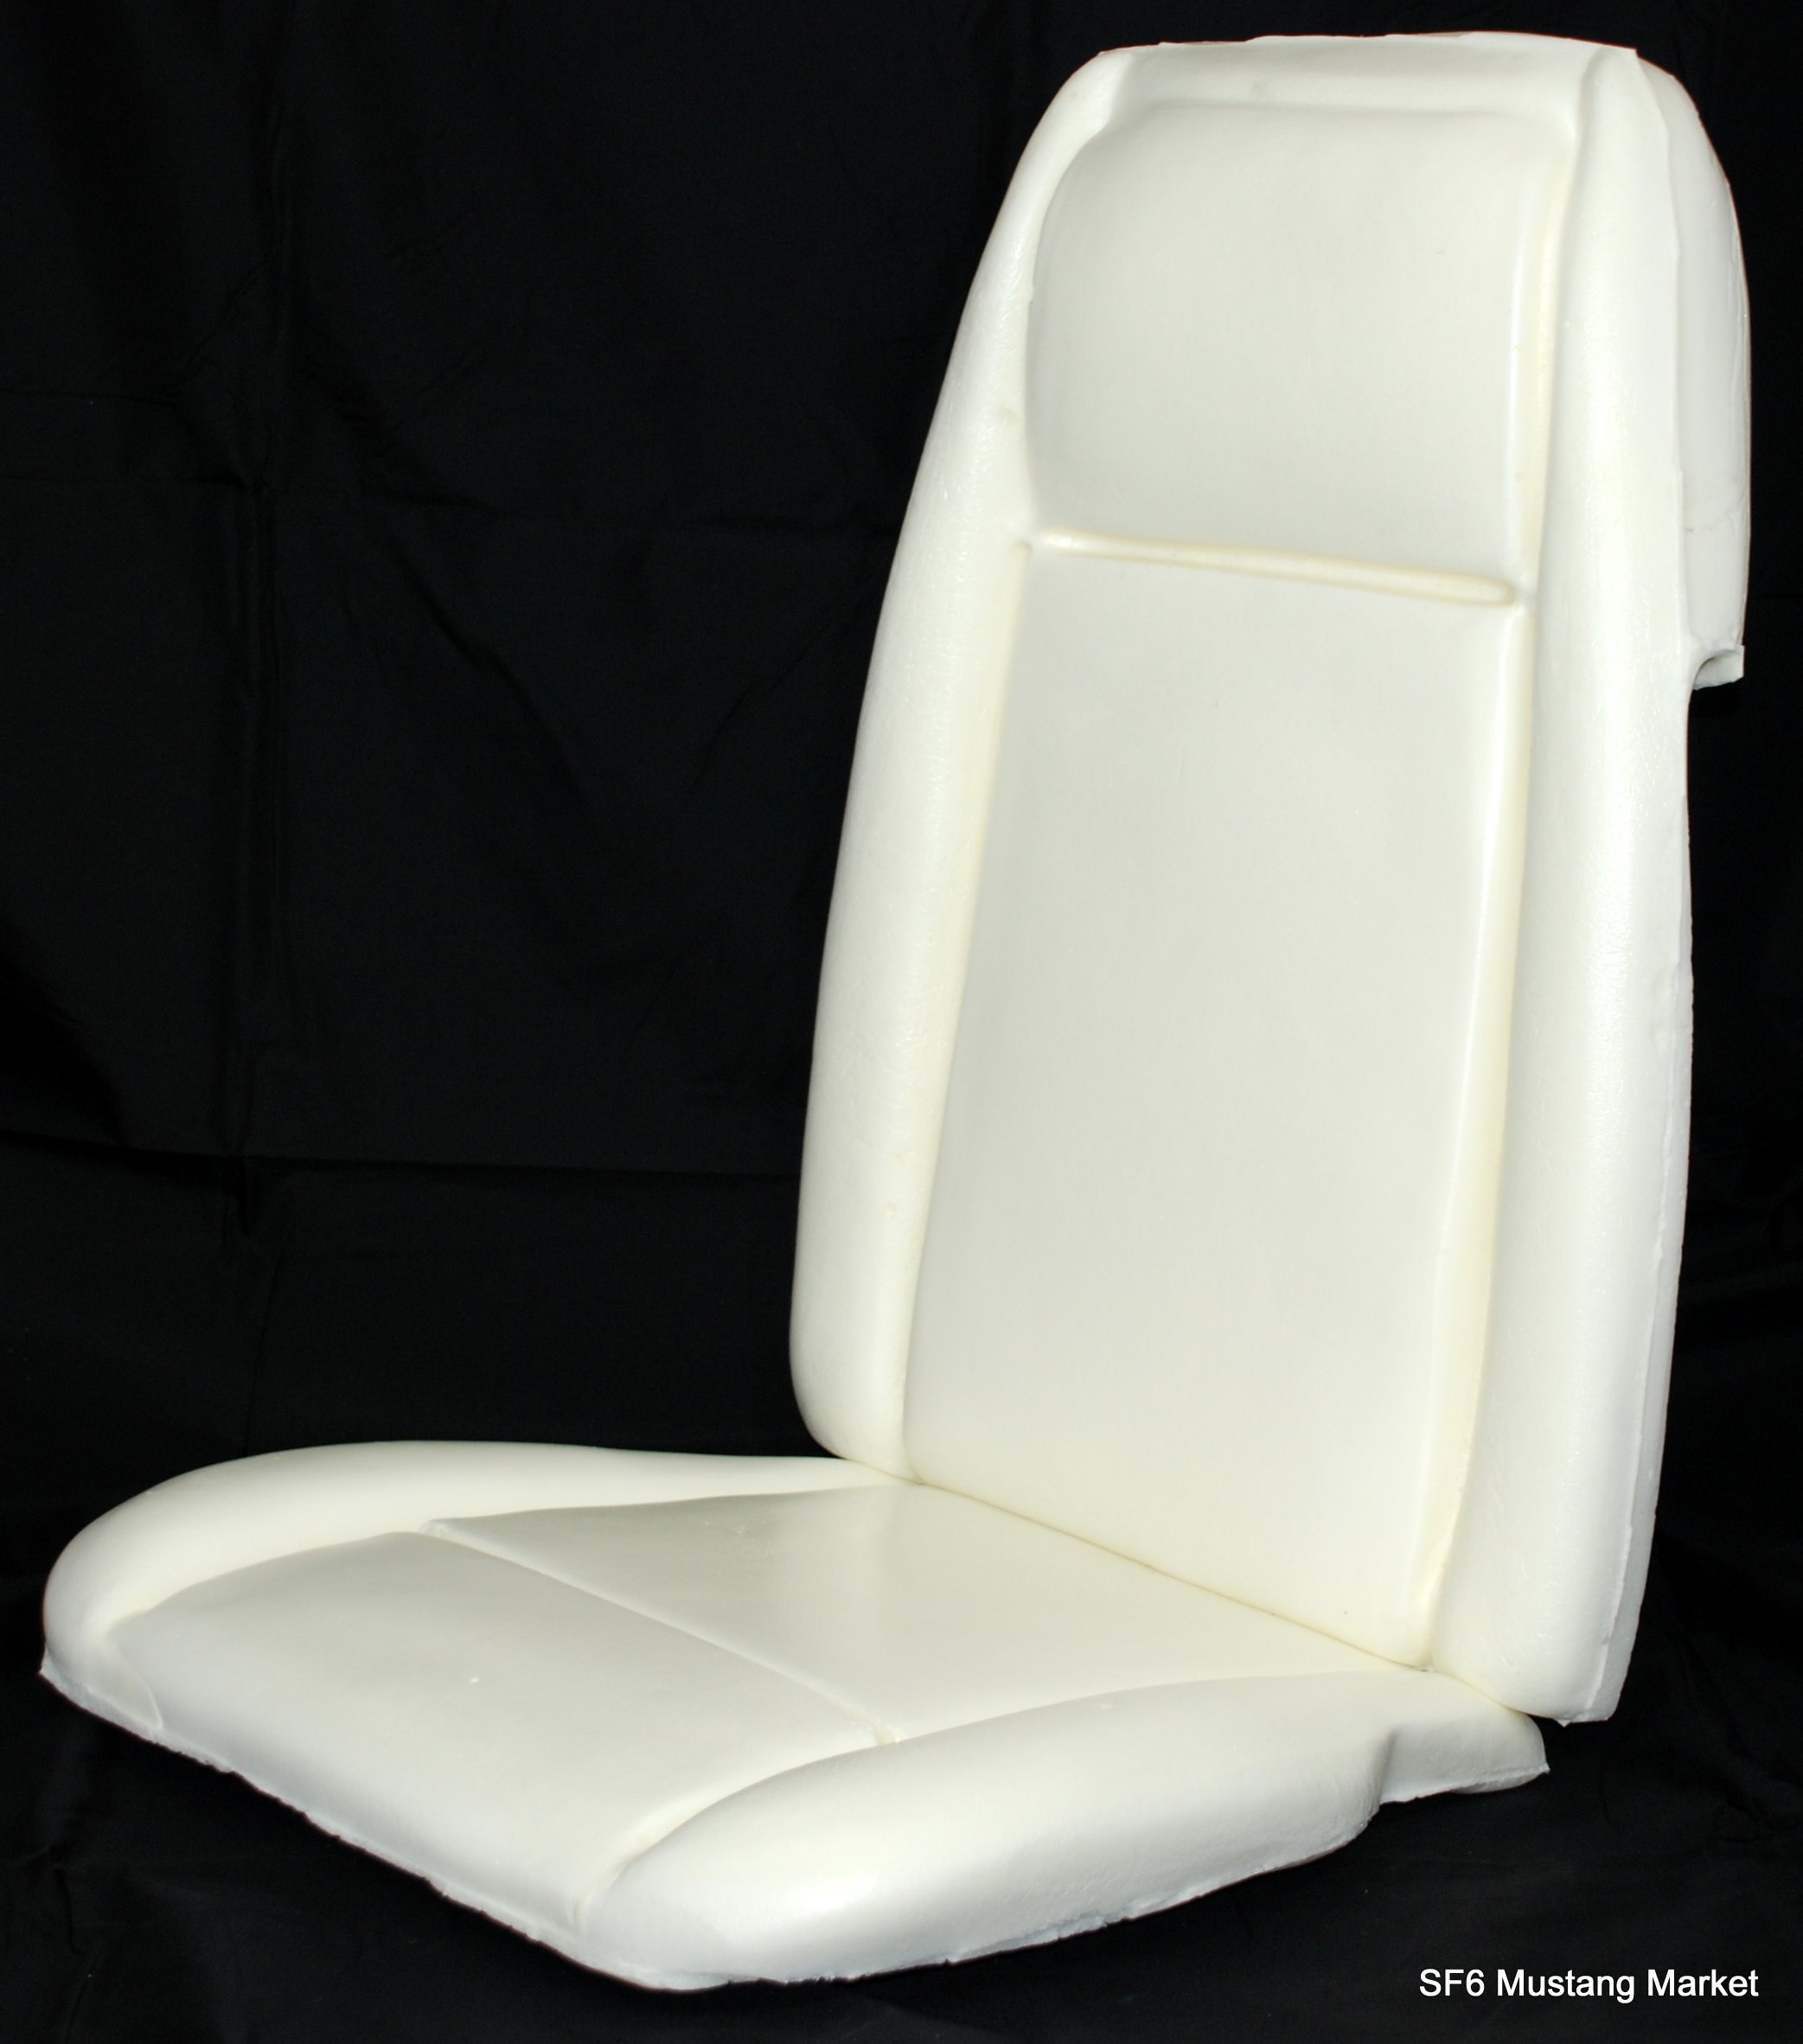 1971-73 Mustang Seat foam All models made by Mustang Market